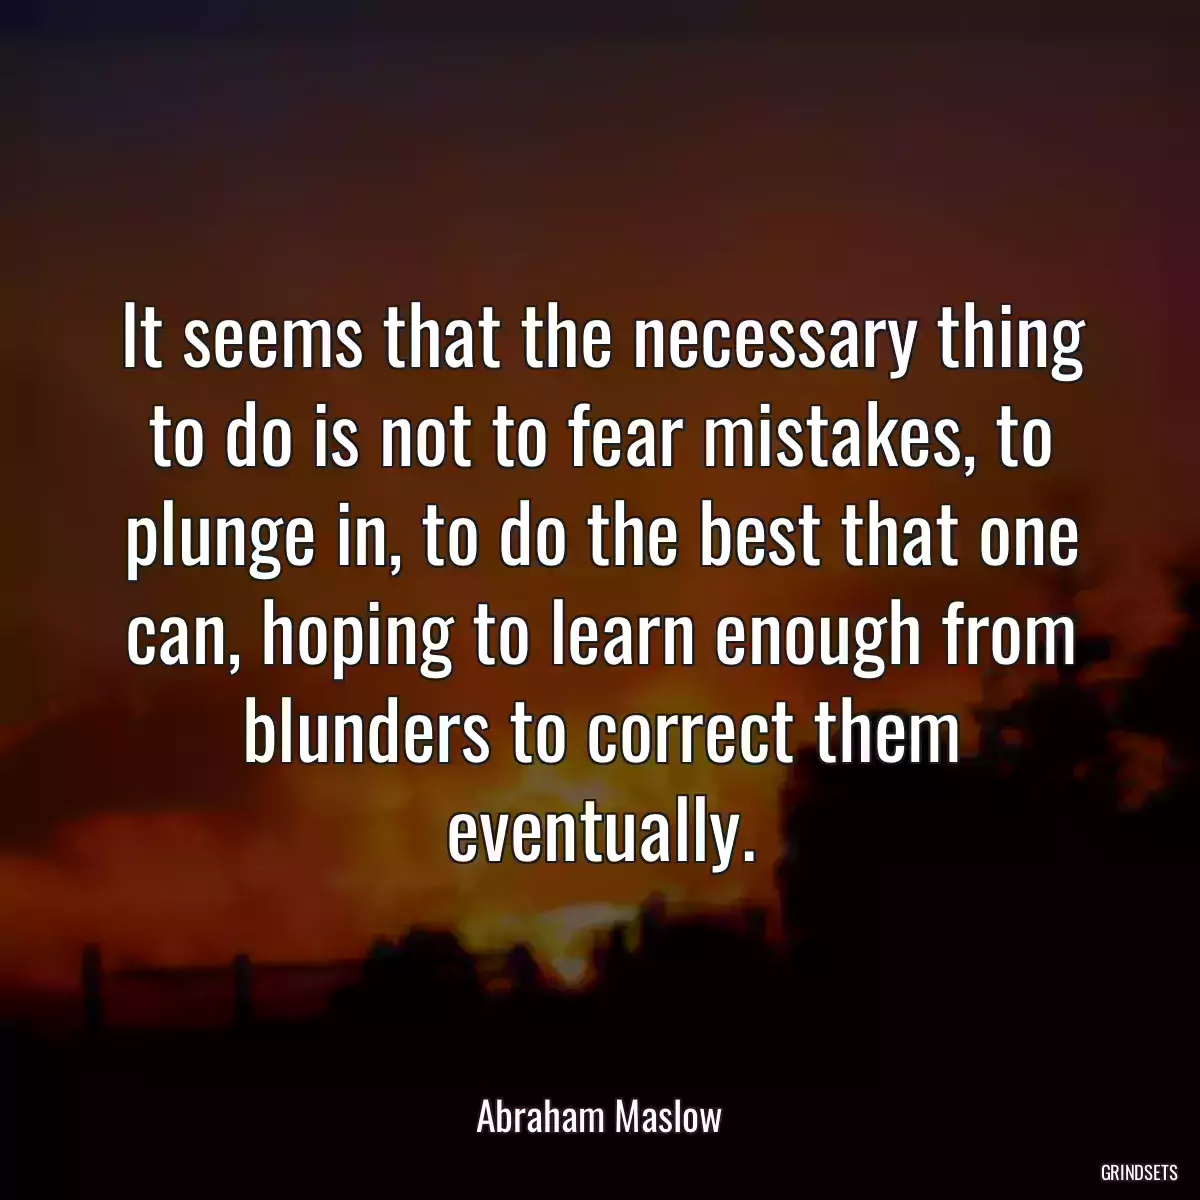 It seems that the necessary thing to do is not to fear mistakes, to plunge in, to do the best that one can, hoping to learn enough from blunders to correct them eventually.